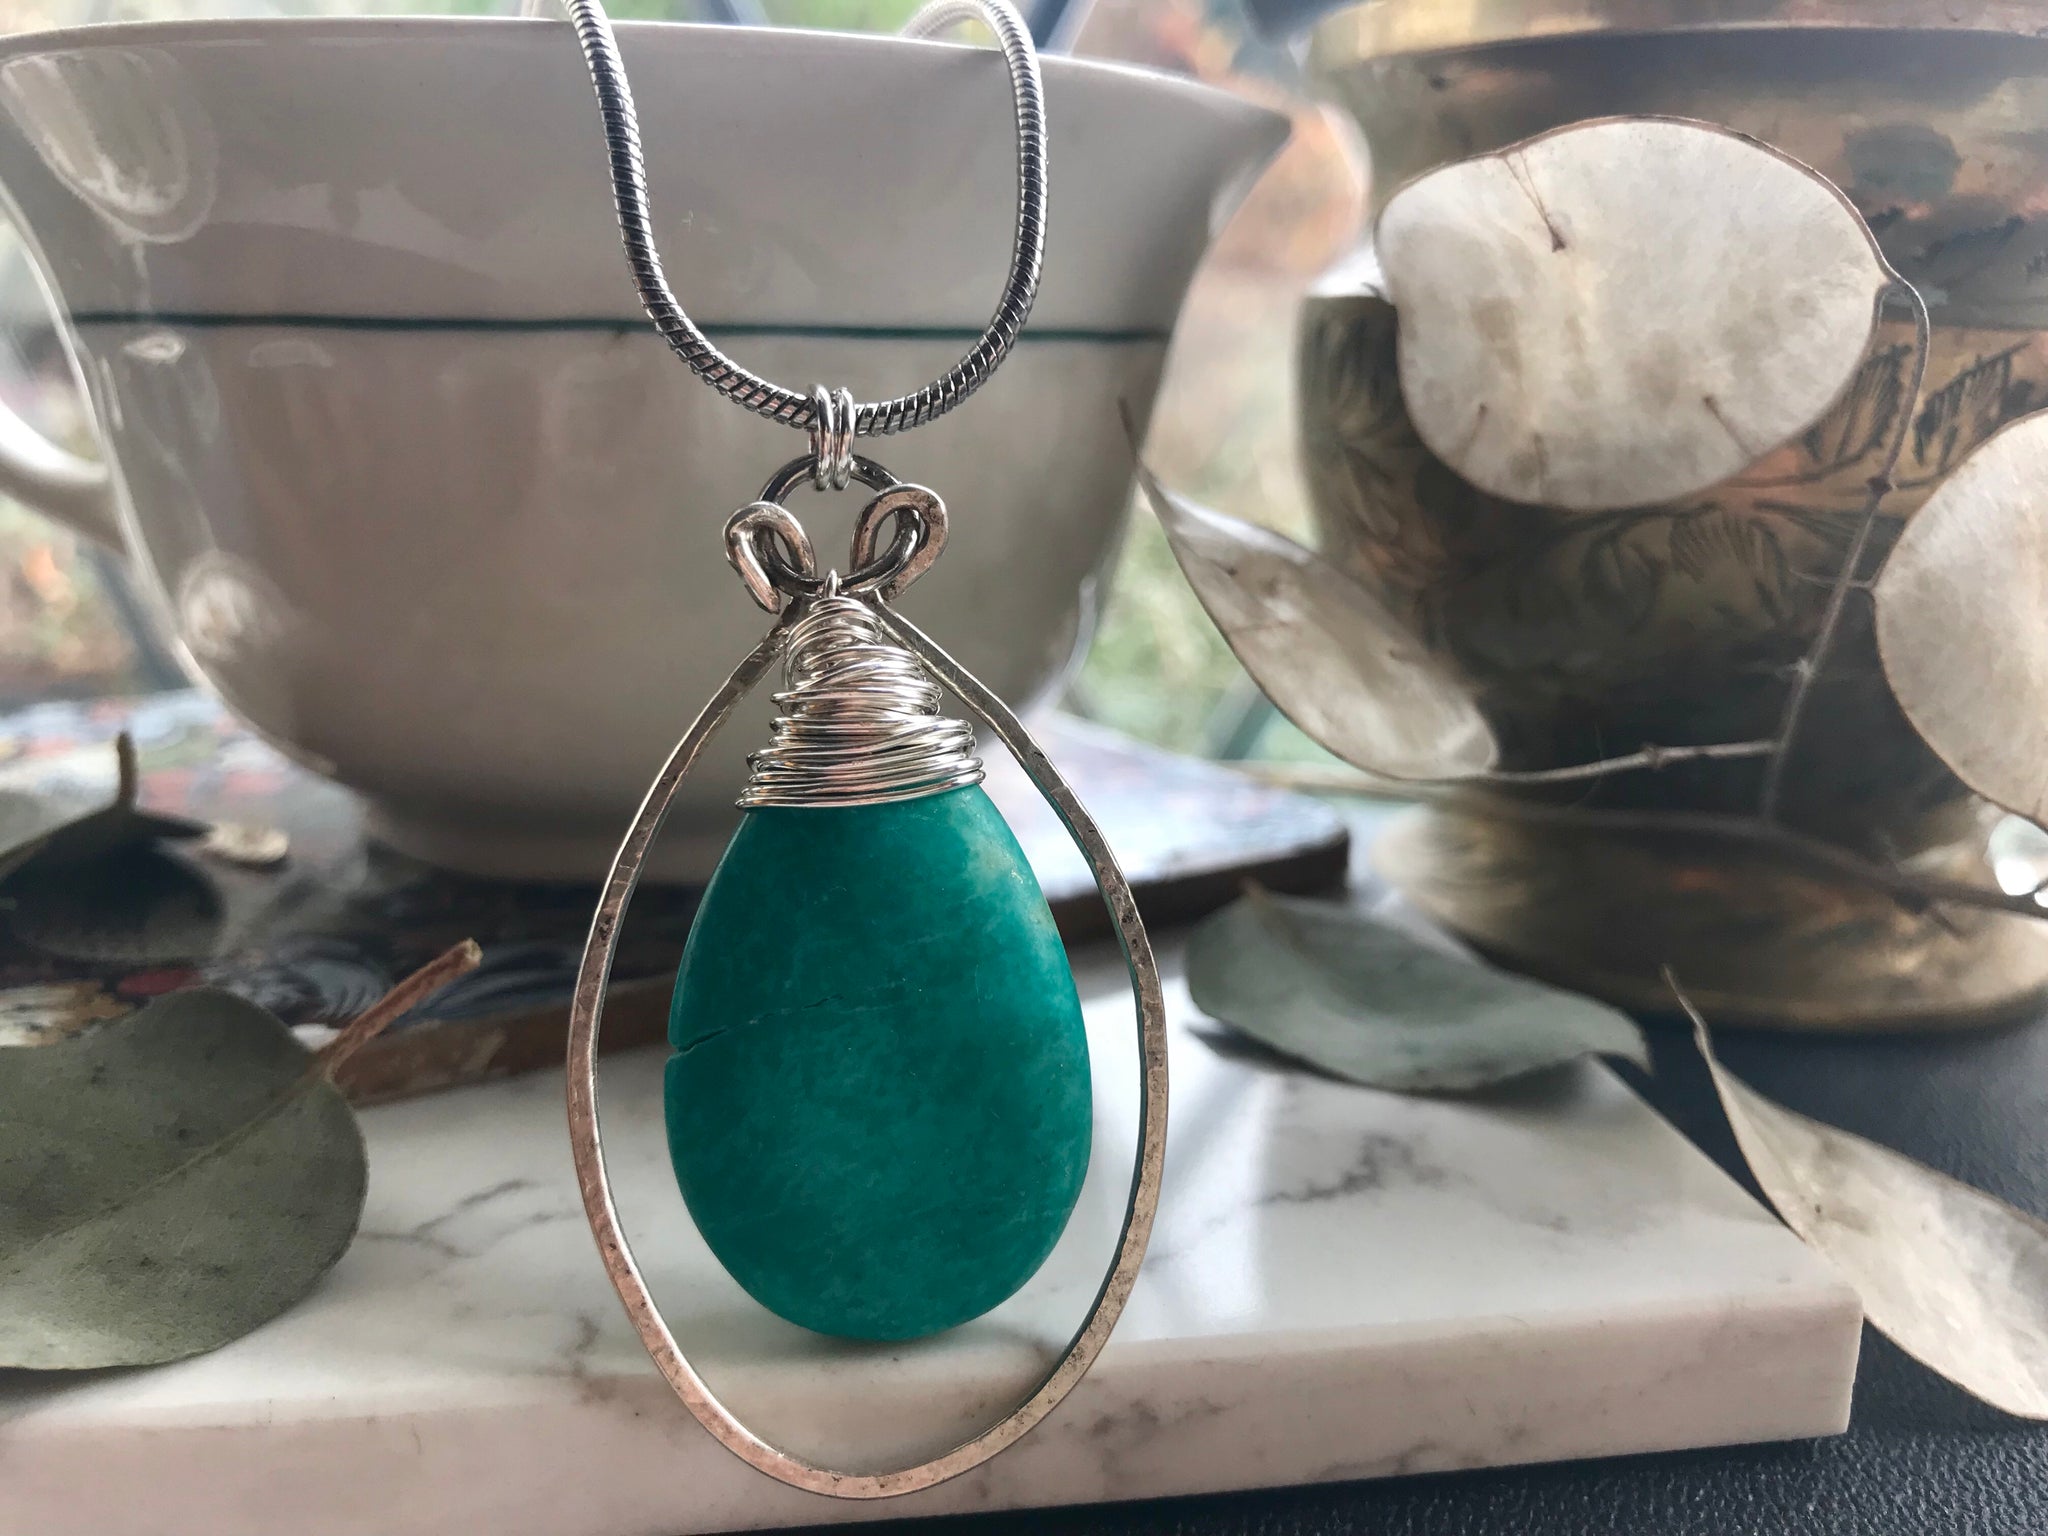 Turquoise and silver drop necklace